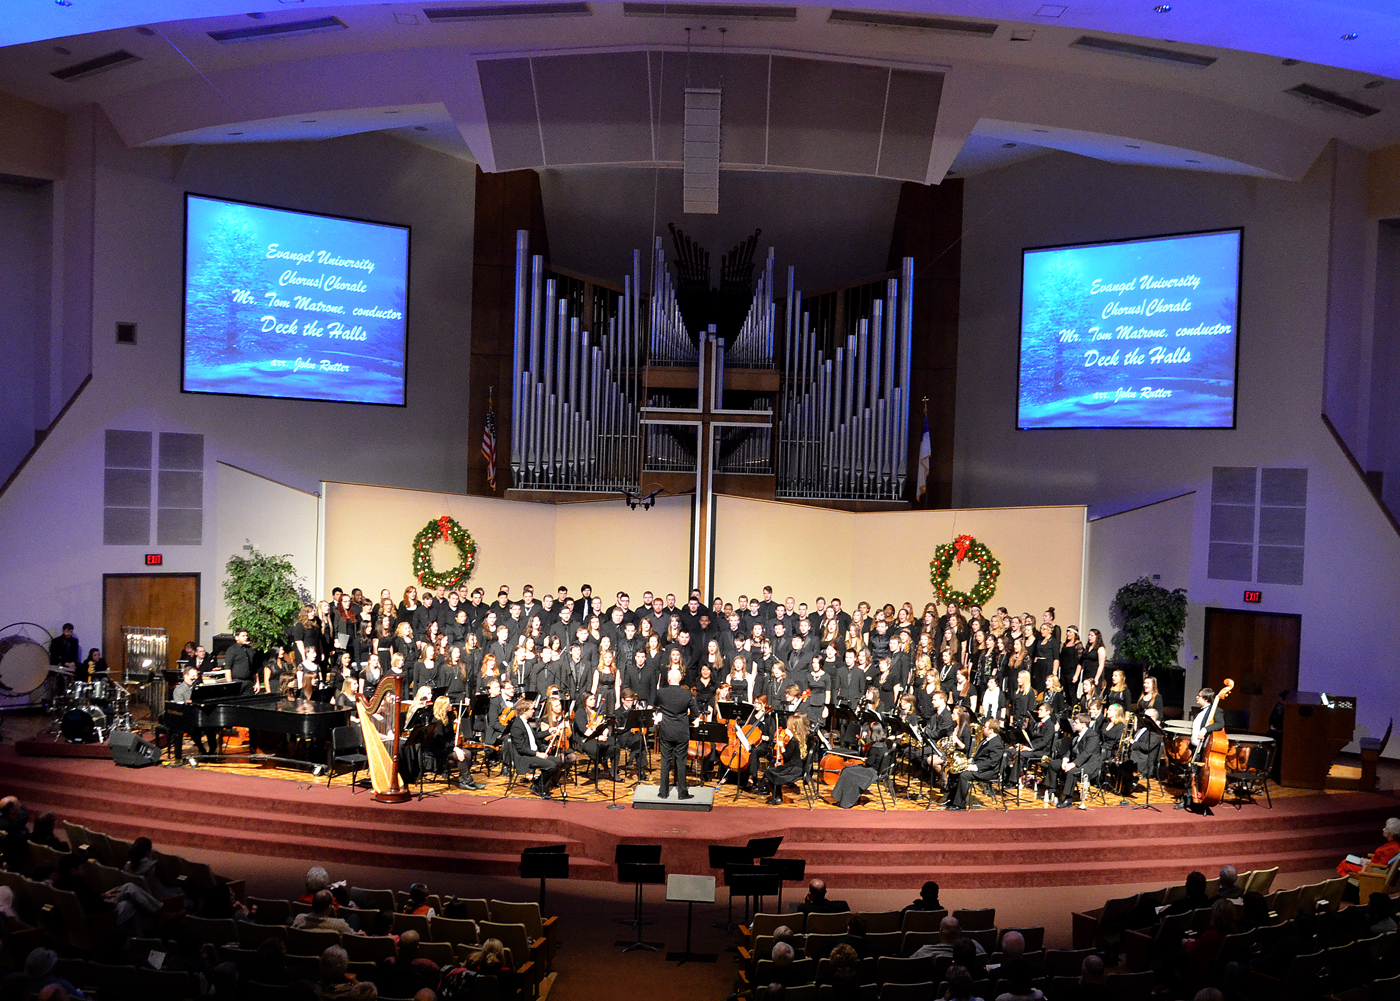 31st annual Christmas Concert to benefit Salvation Army, Dec. 5